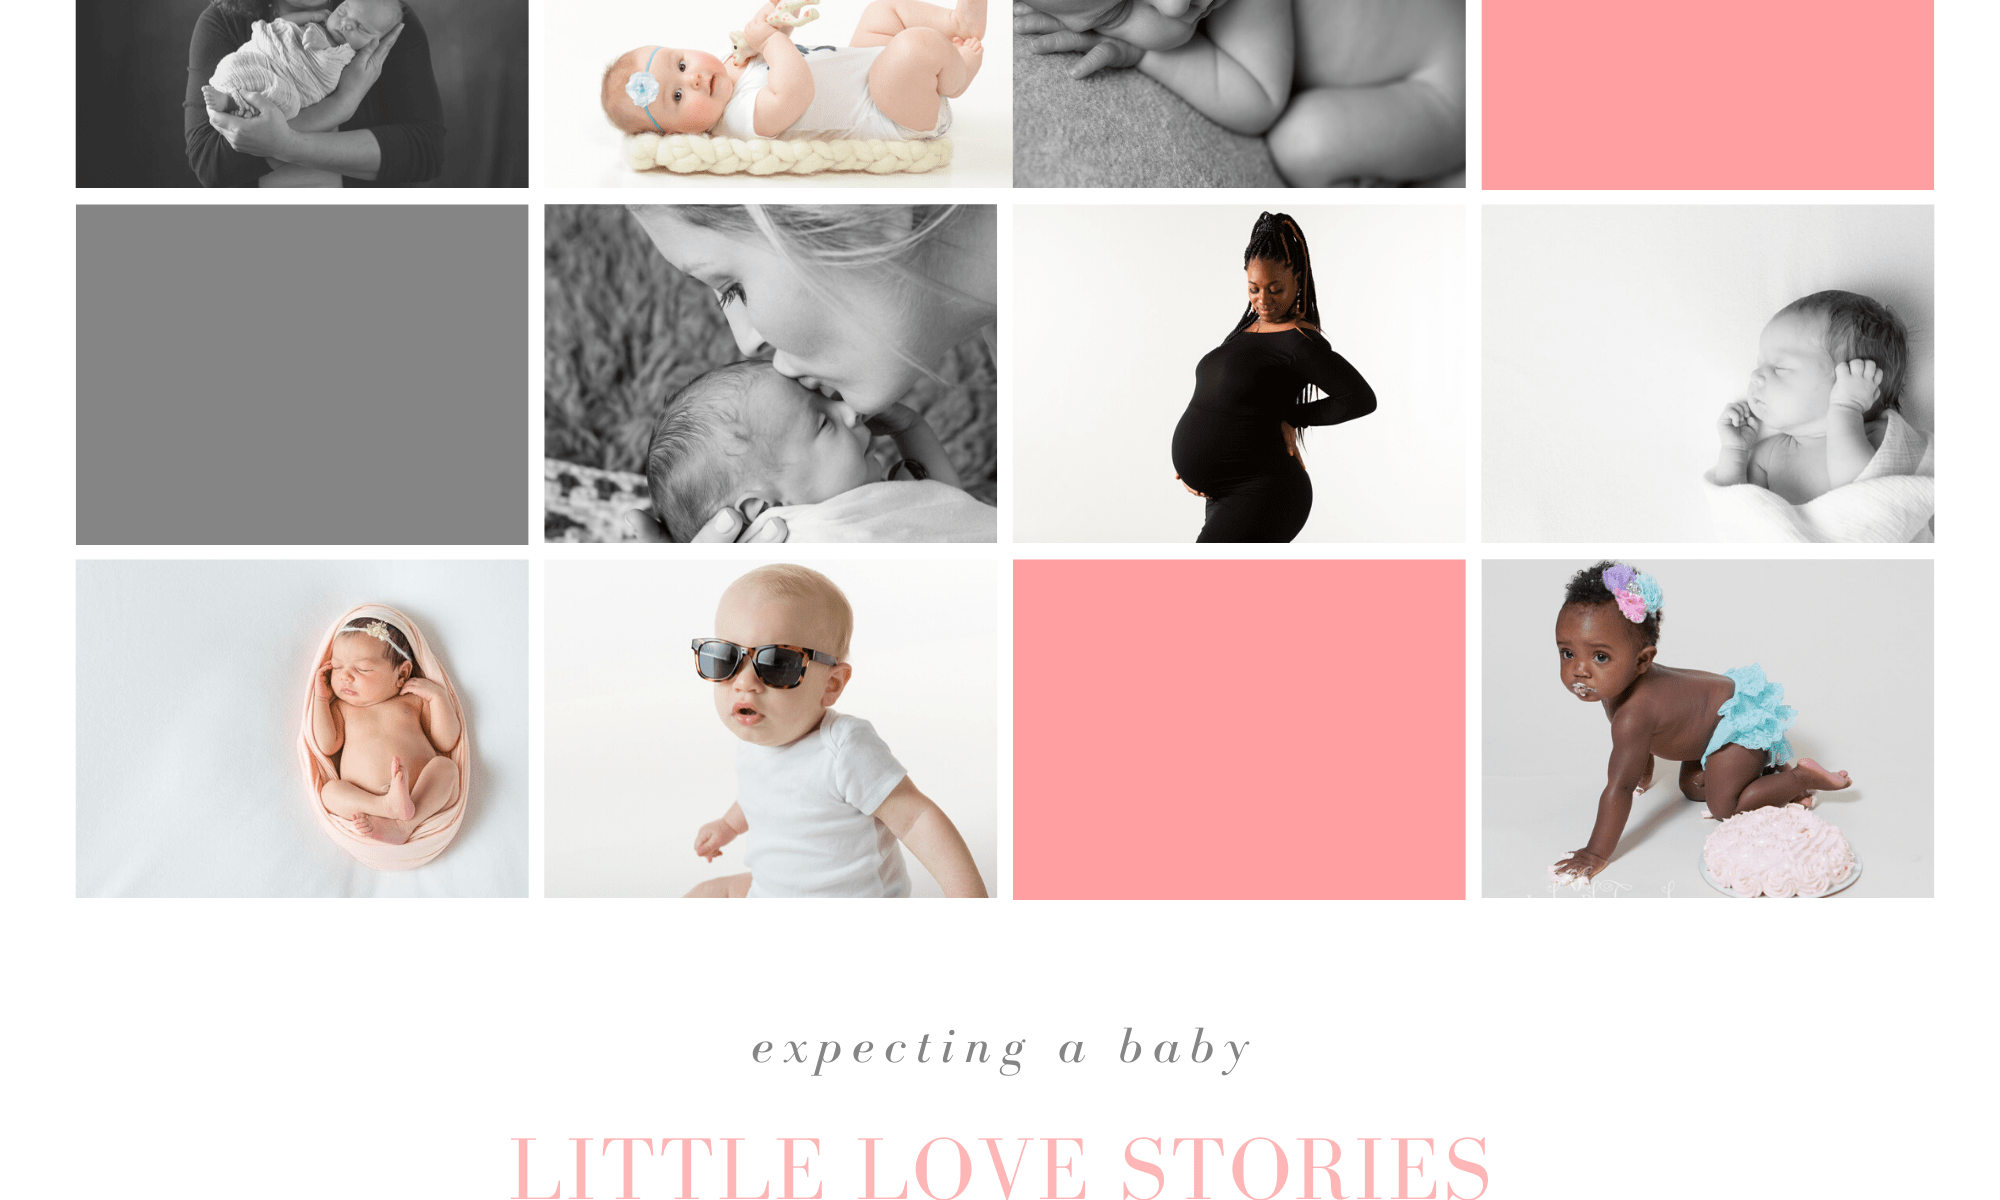 little love stories, baby's first year, image collage, Fort Mill, SC, Charlotte, NC, Tega Cay, SC, newborn, pregnancy, crawling baby, sunglasses,